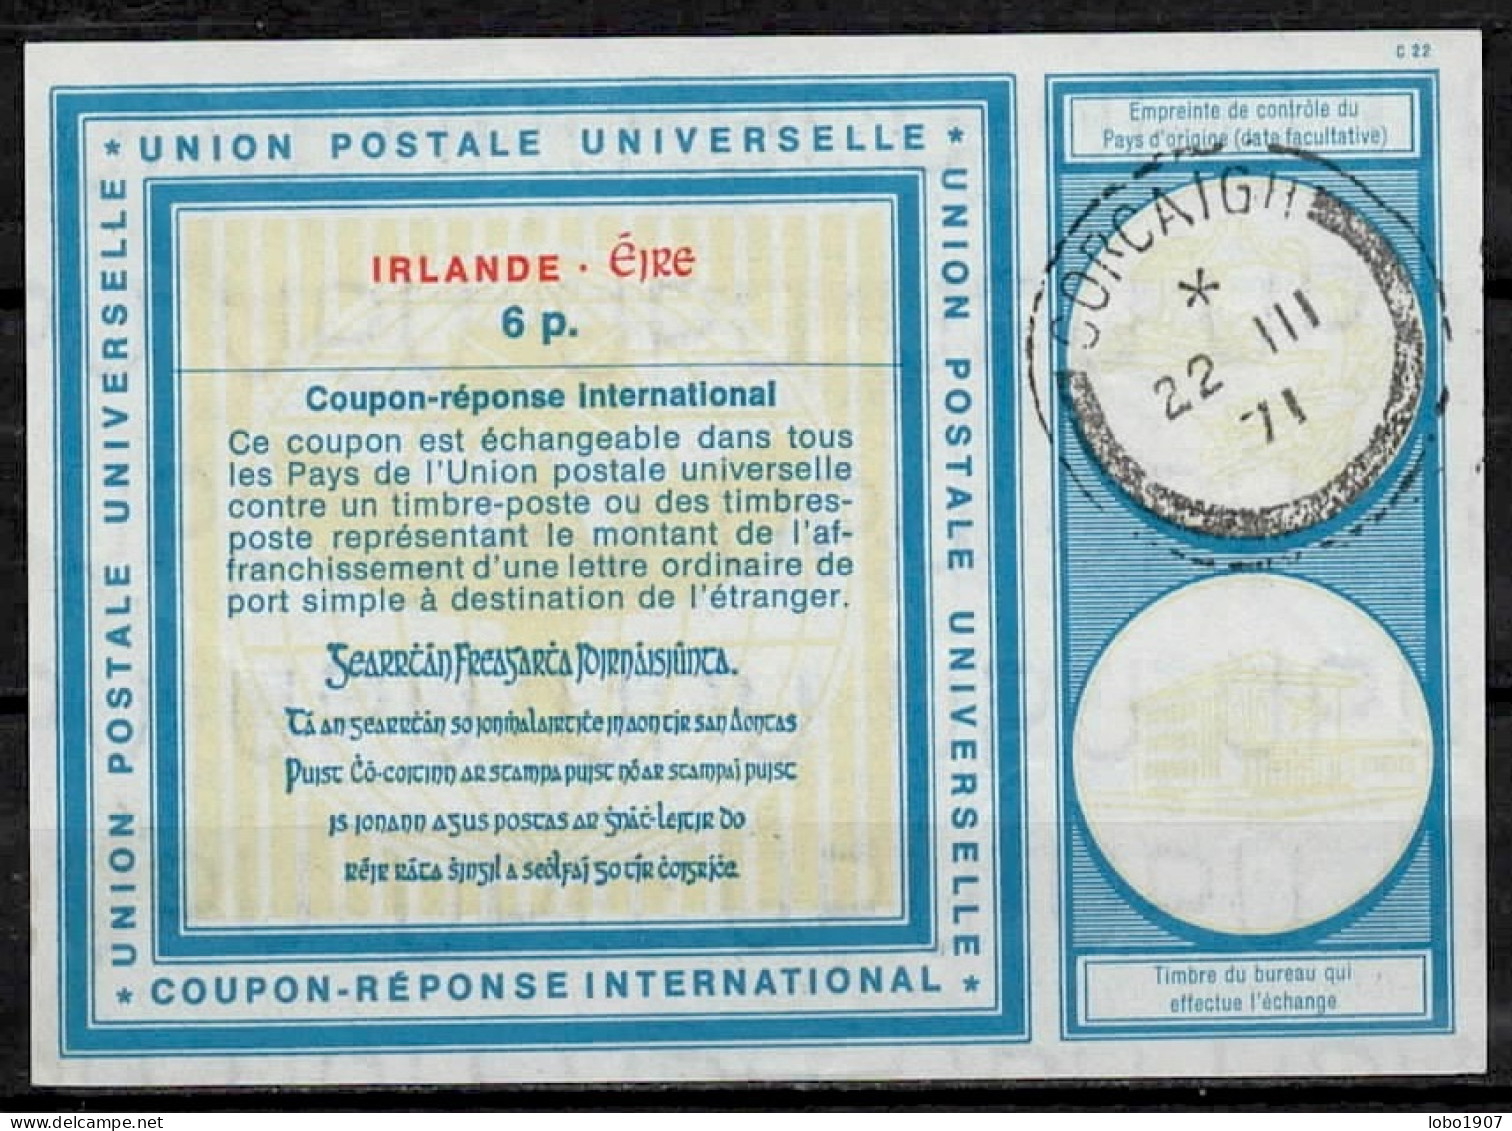 IRLANDE IRELAND ÉIRE  Vi19 6p.  International Reply Coupon Reponse Antwortschein IRC IAS O CORCAIGH  22.03.71 - Entiers Postaux